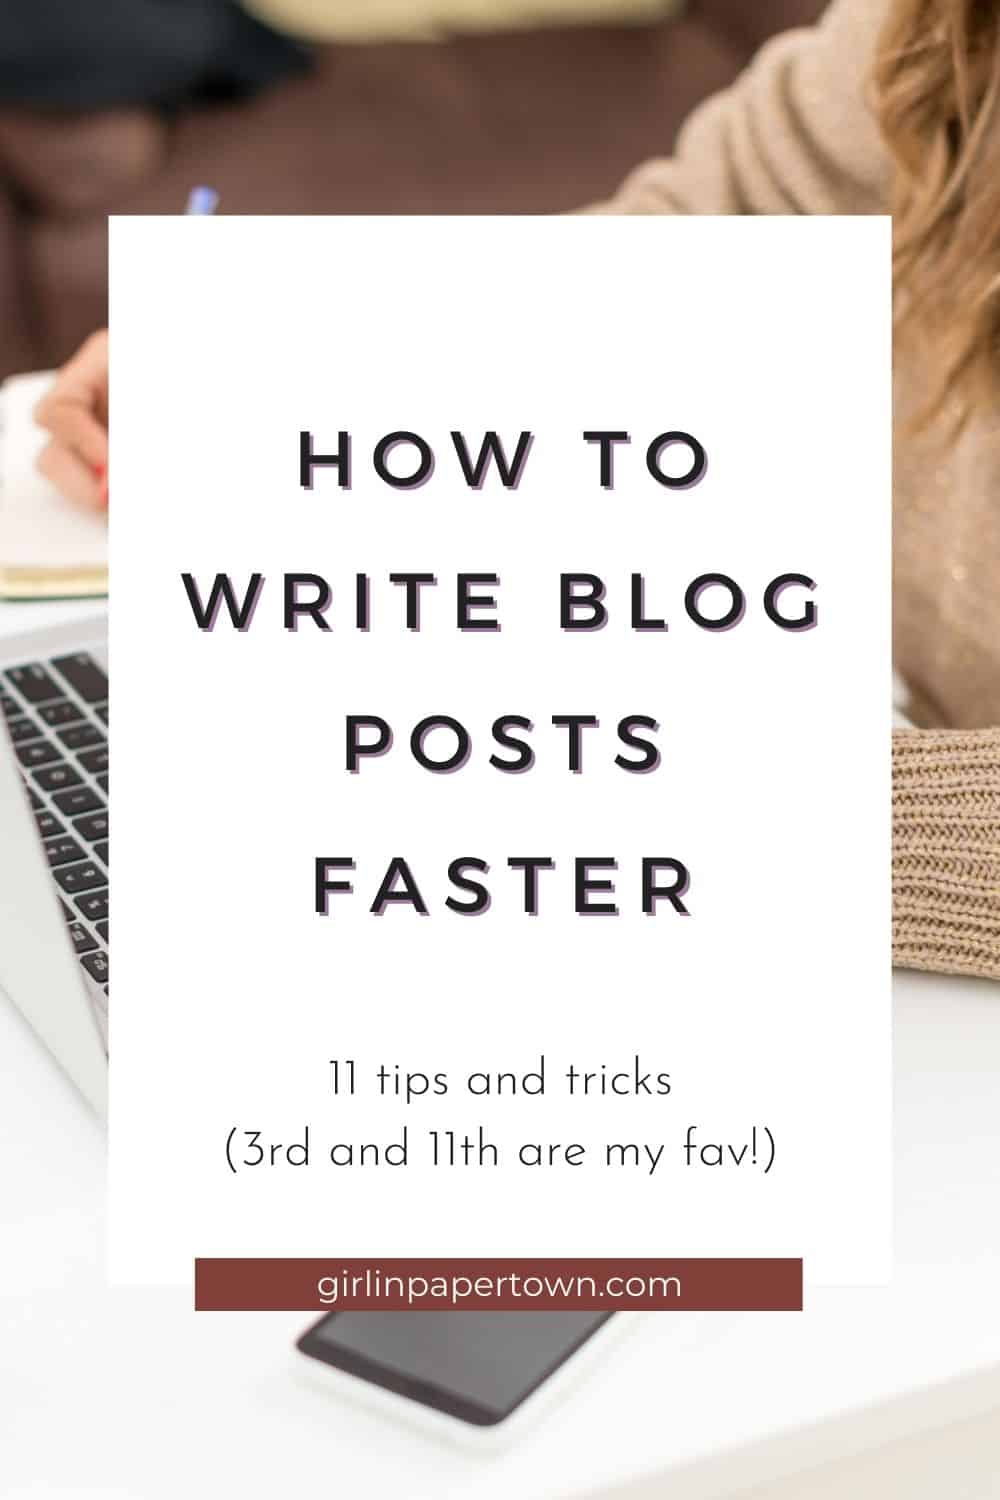 Blogging for beginners - How to write blog posts faster - 11 tips and tricks